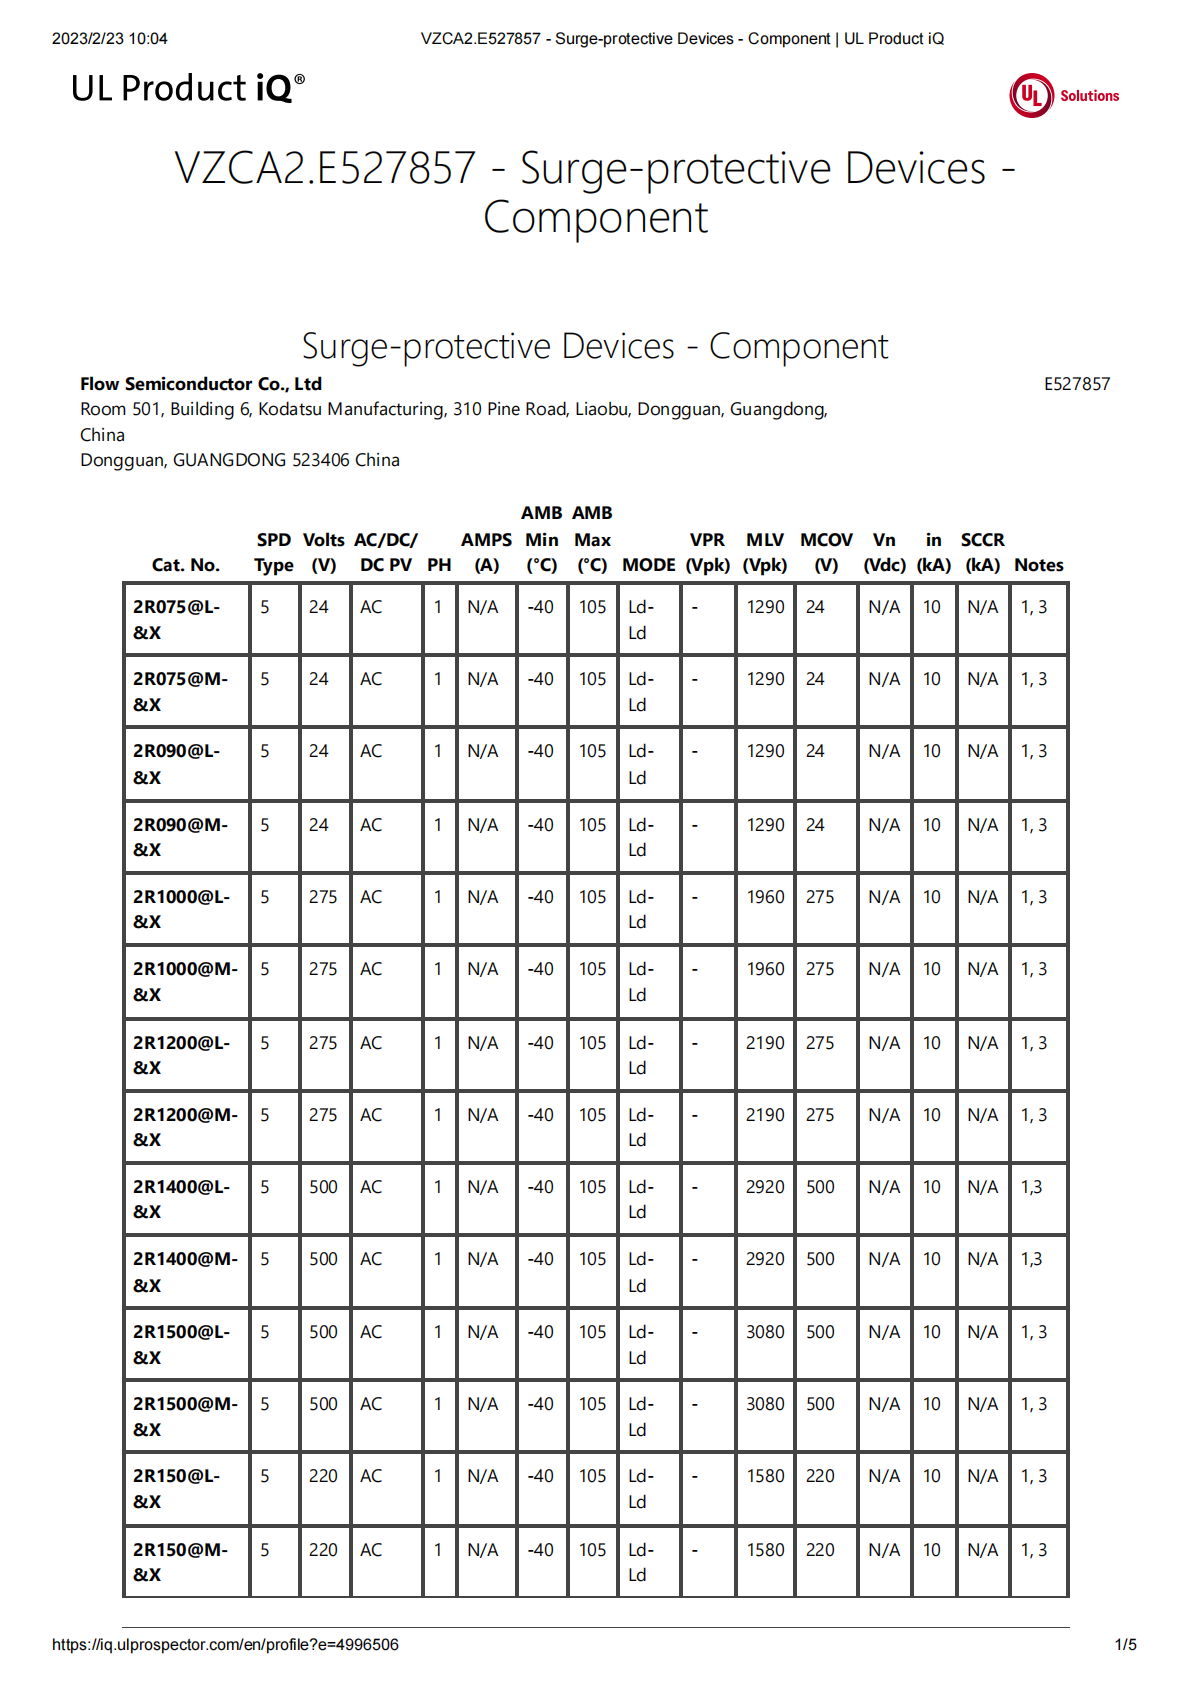 GDT安規認證（VZCA2.E527857 - Surge-protective Devices - Component）